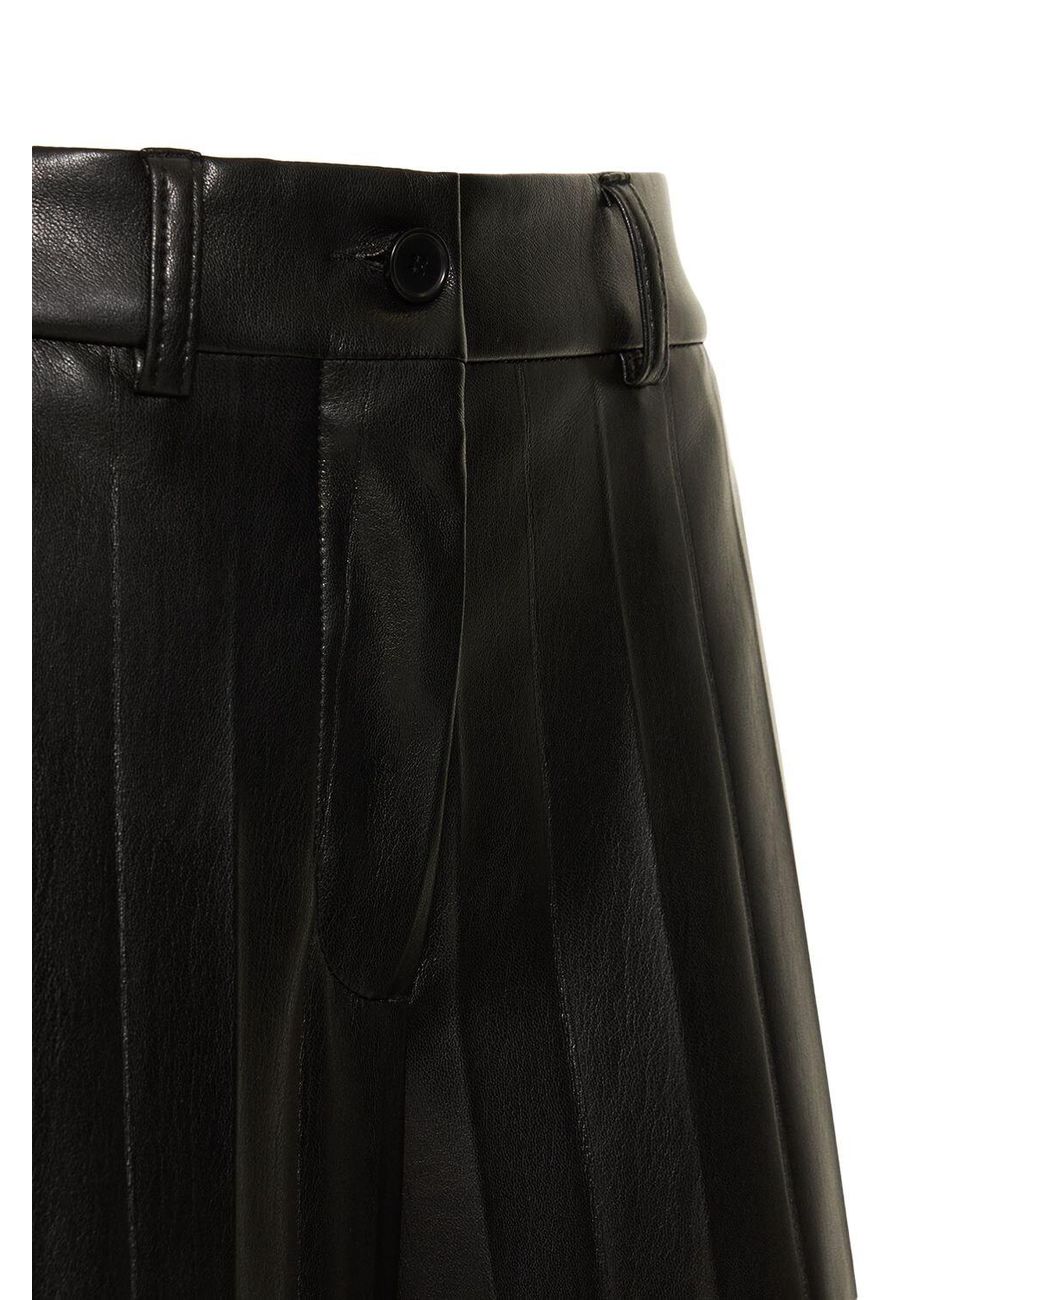 Grey - Save 32% Womens Trousers MSGM Faux Leather Cropped Pants in Nero Slacks and Chinos MSGM Trousers Slacks and Chinos 